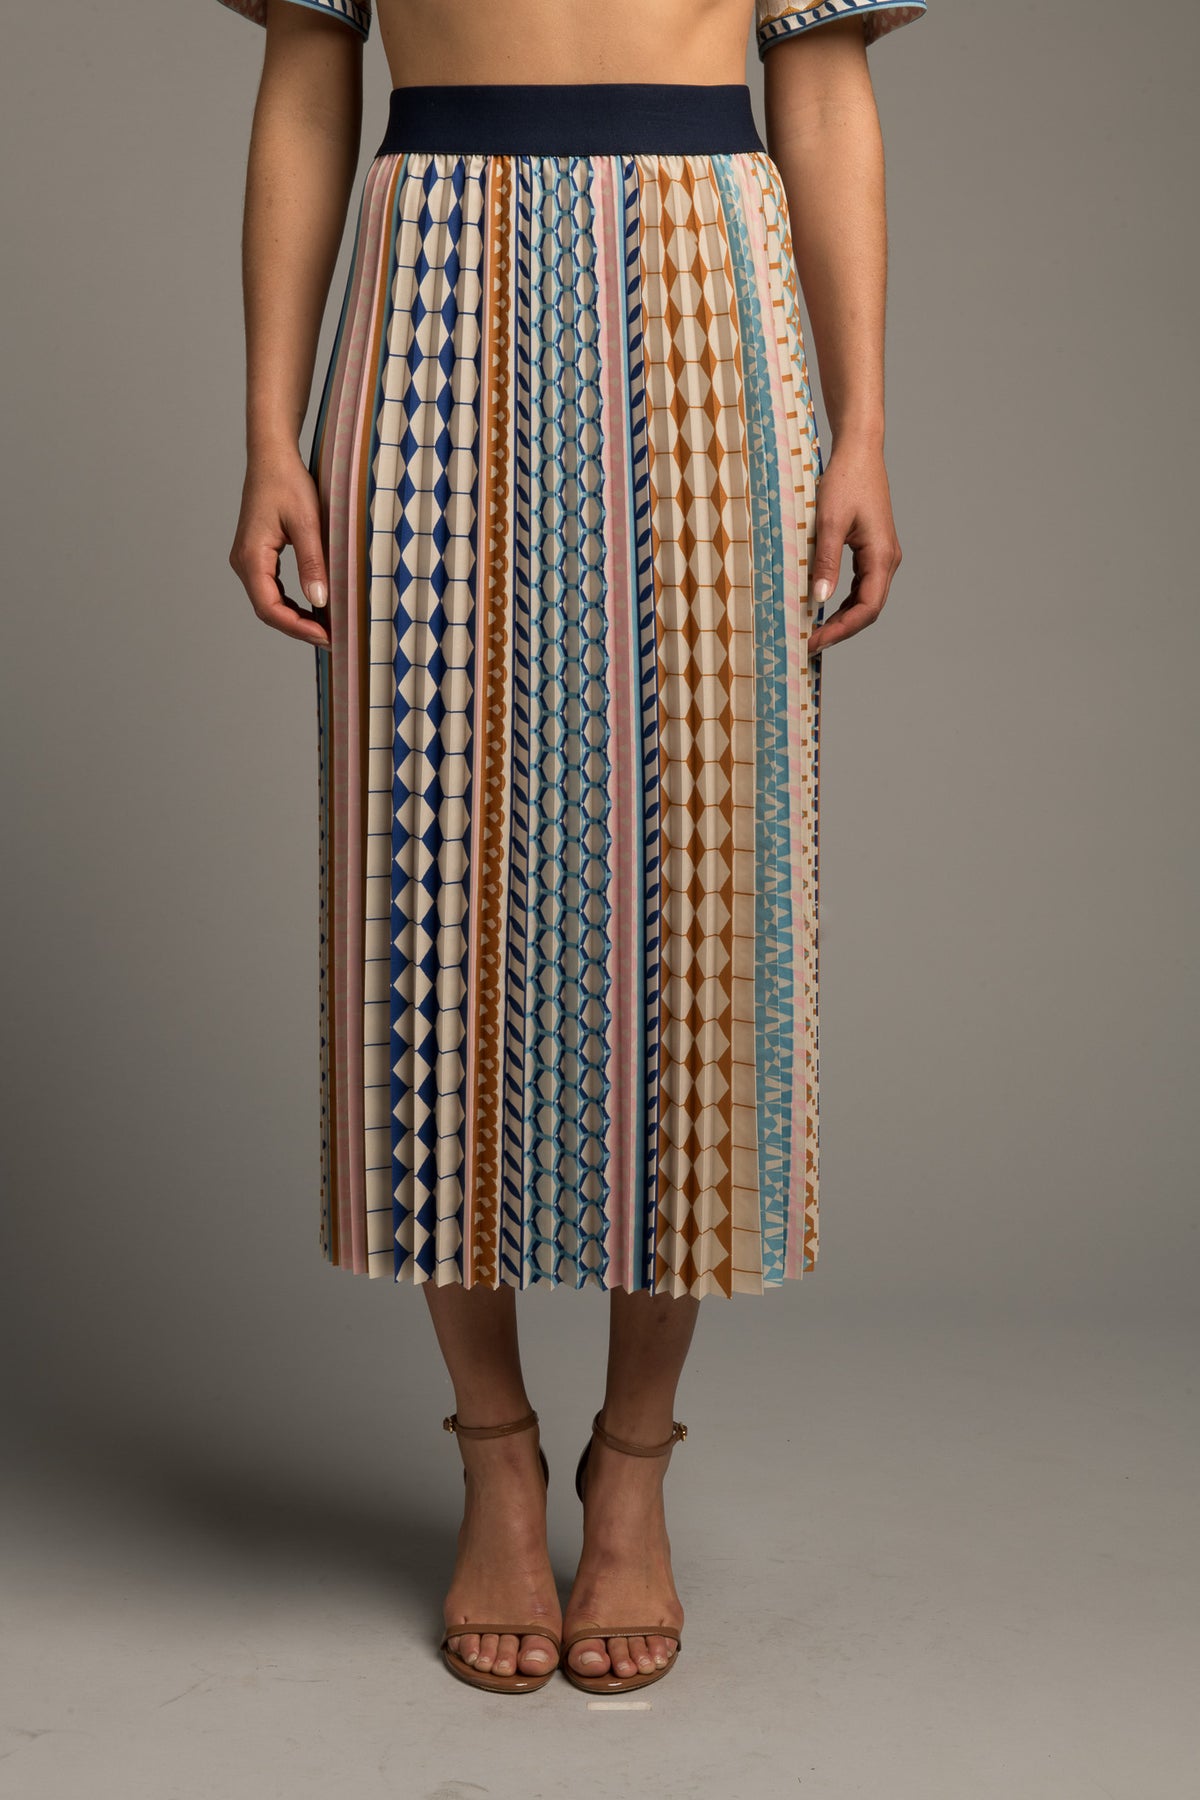 Moroccan Tiles Pleated Skirt